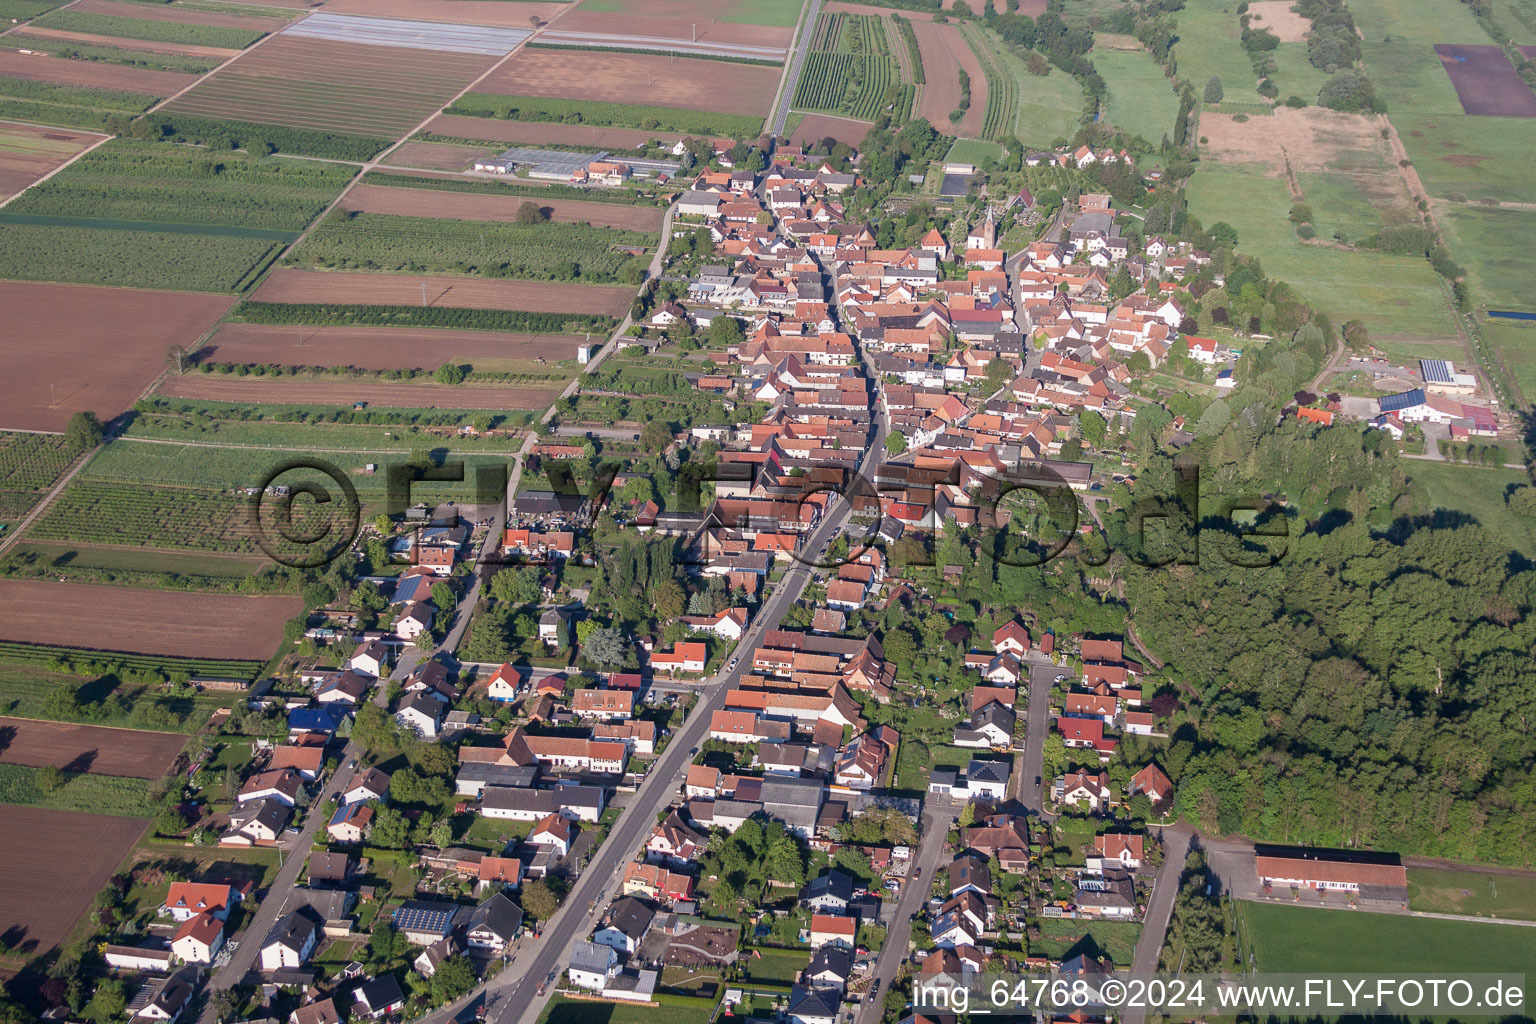 Village - view on the edge of agricultural fields and farmland in Winden in the state Rhineland-Palatinate, Germany from above